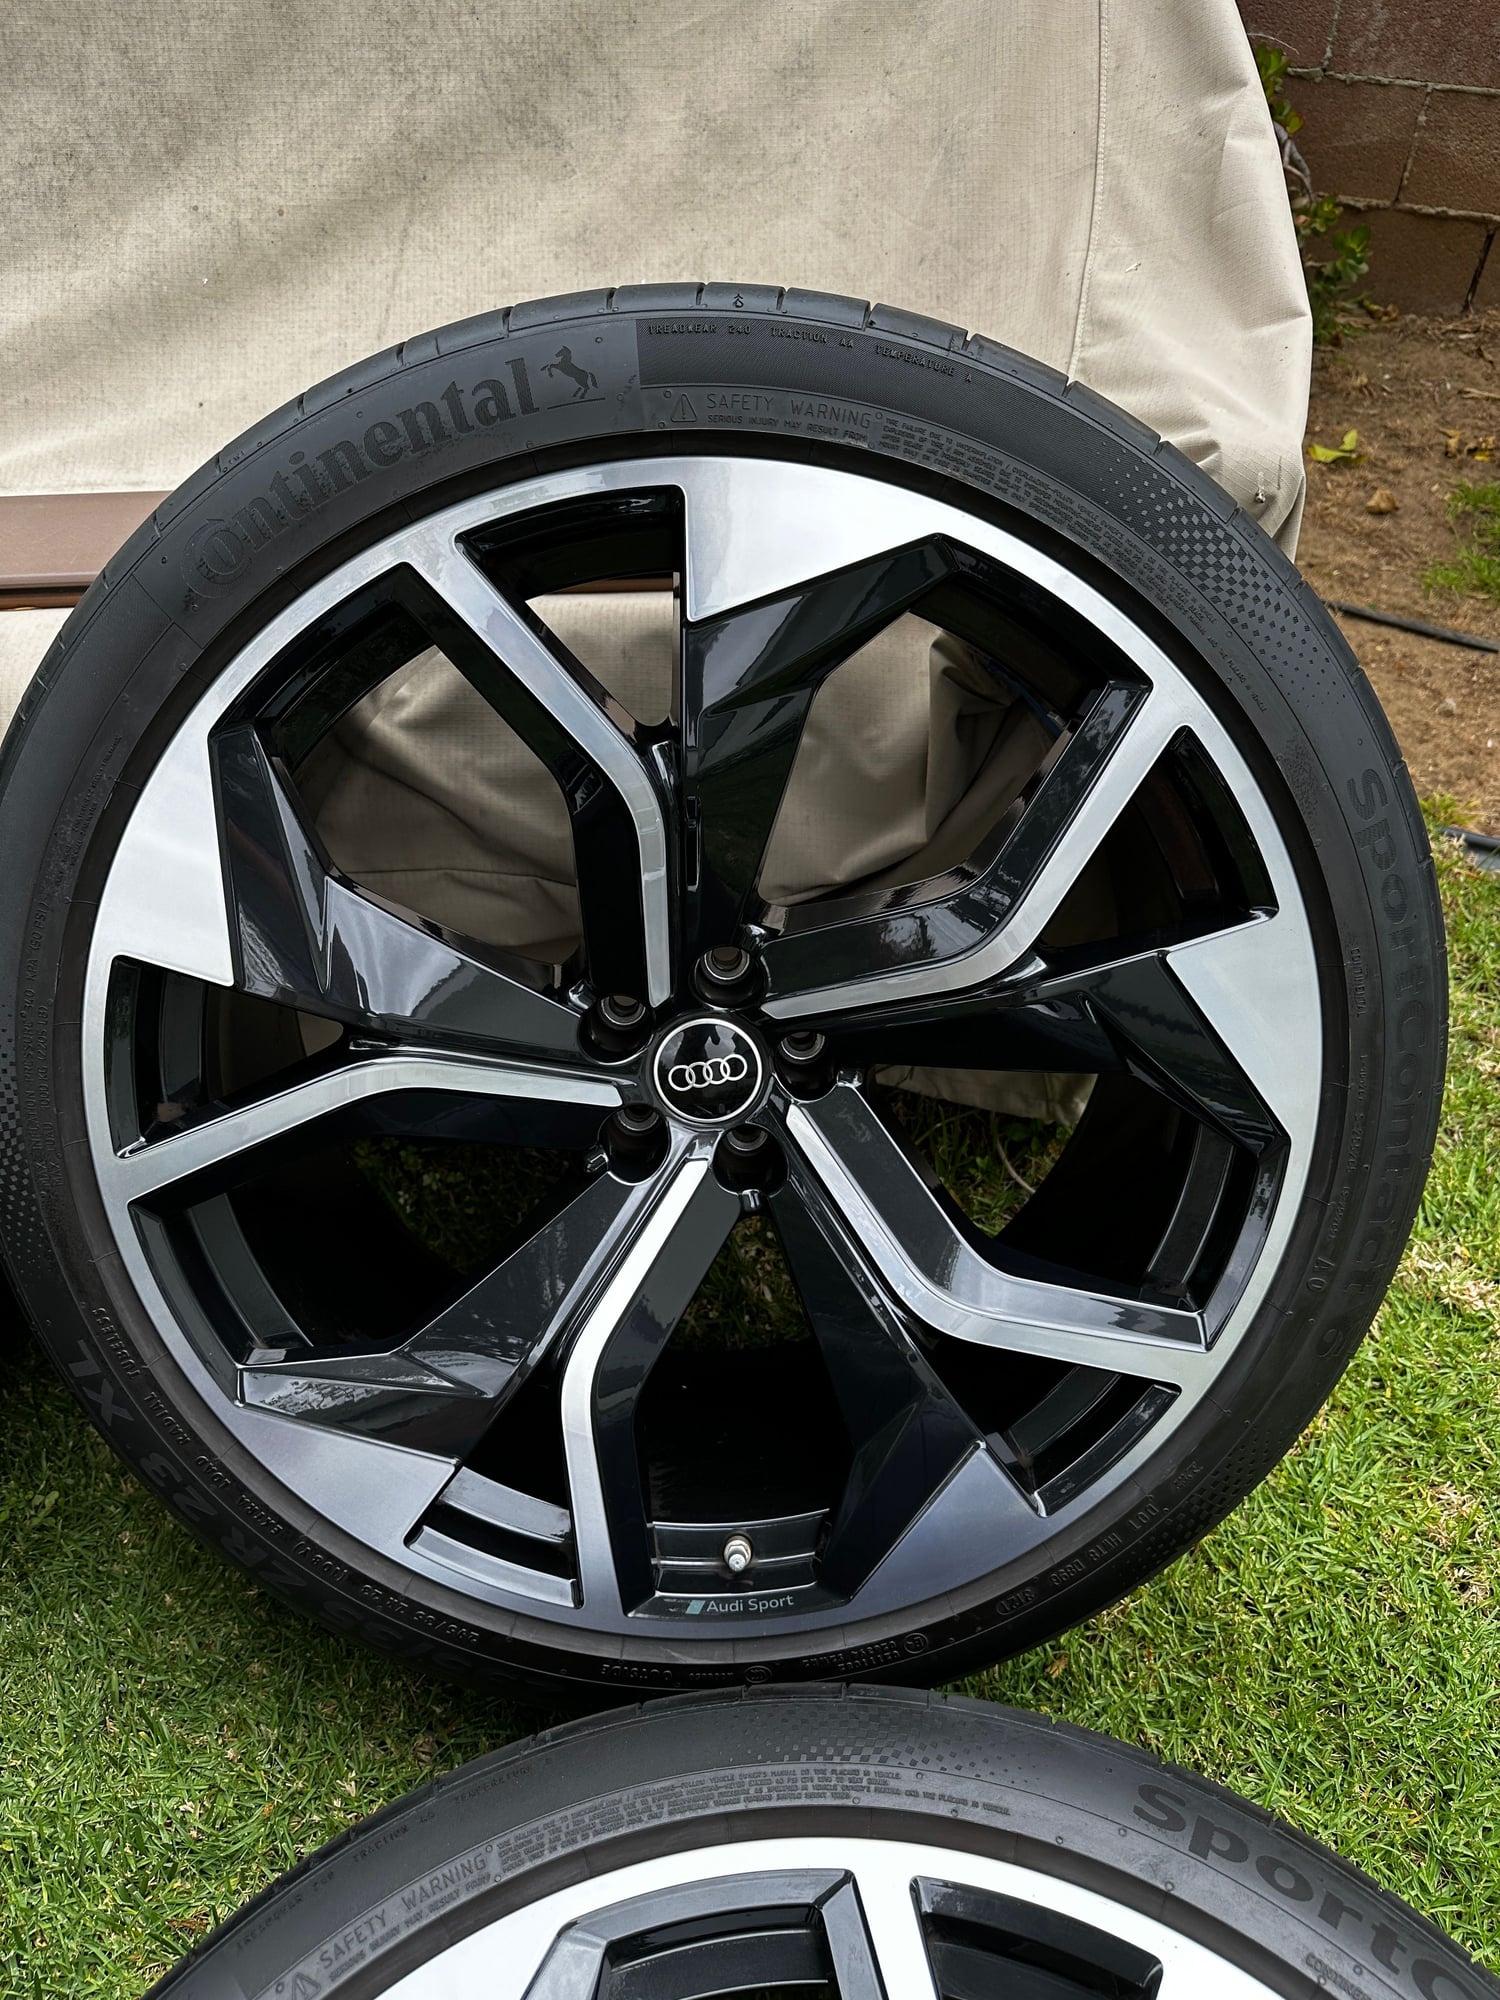 Wheels and Tires/Axles - Audi RSQ8 OEM wheels and tires 295/35/23 with approx 2K miles. - Used - Tustin, CA 92705, United States